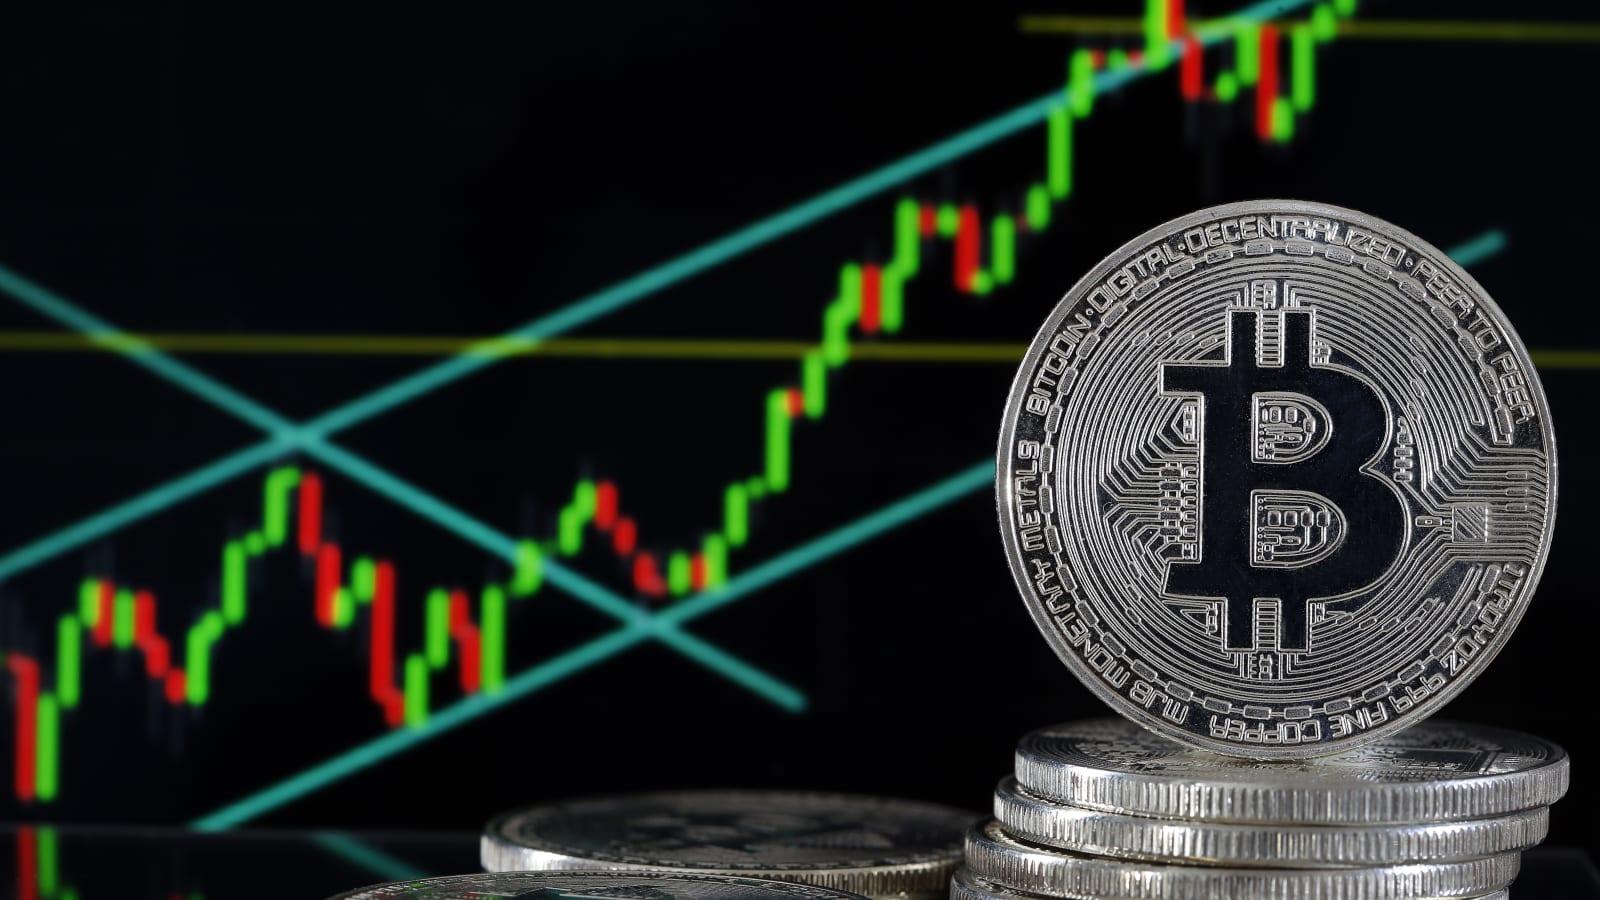 Bitcoin (BTC) rally extends, price hits record high above $40,000